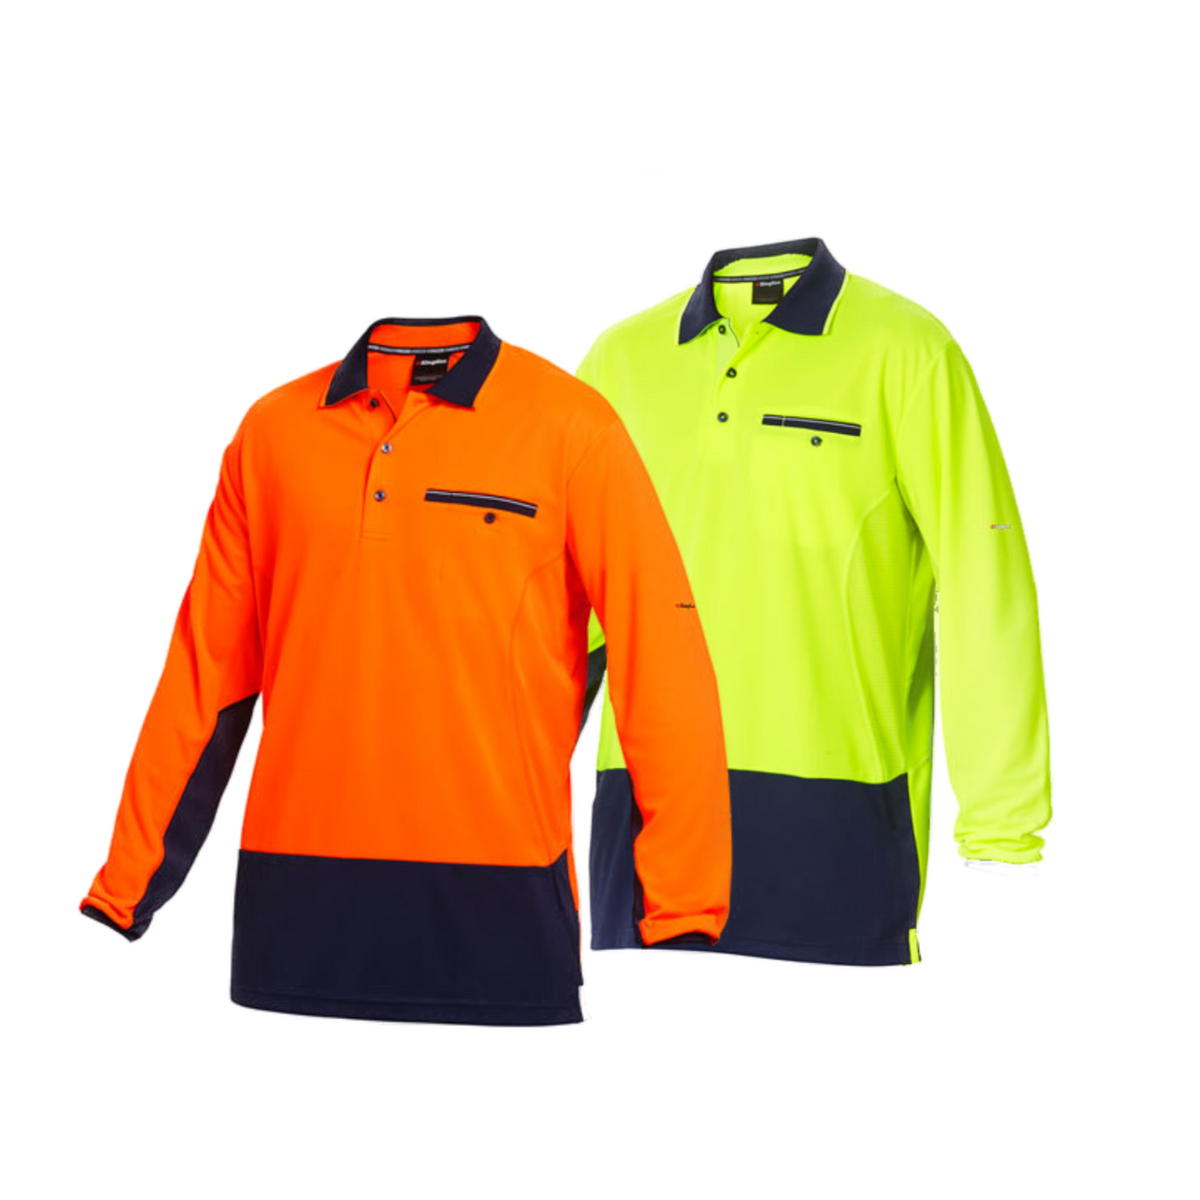 KingGee Mens Workcool Shirt Top Hi-Vis Polo Long Sleeve Work Safety K54840-Collins Clothing Co